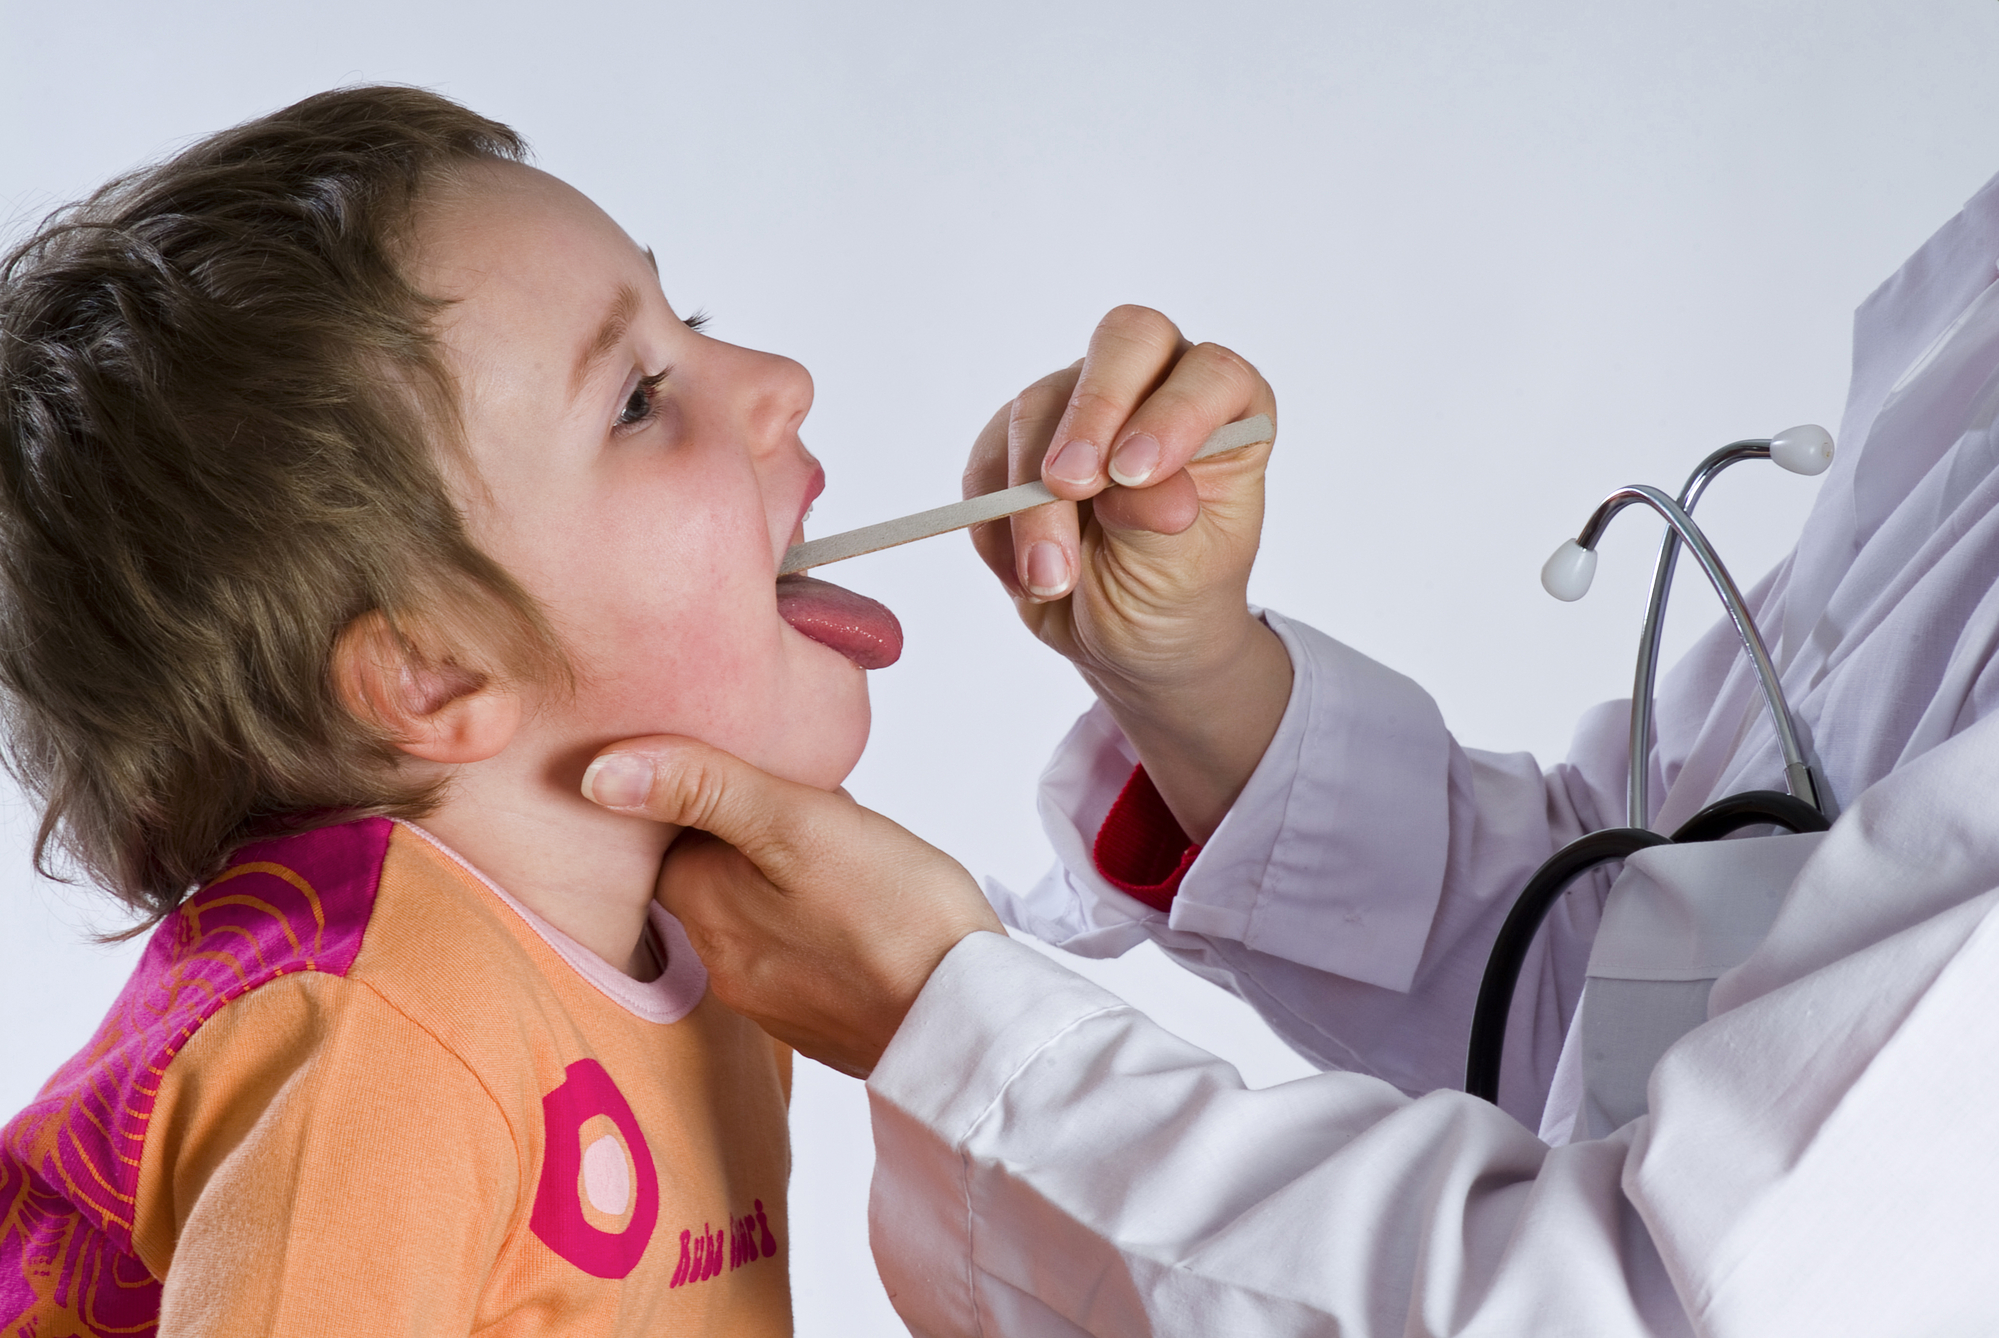 a doctor uses a tongue depressor to look down a child's throat